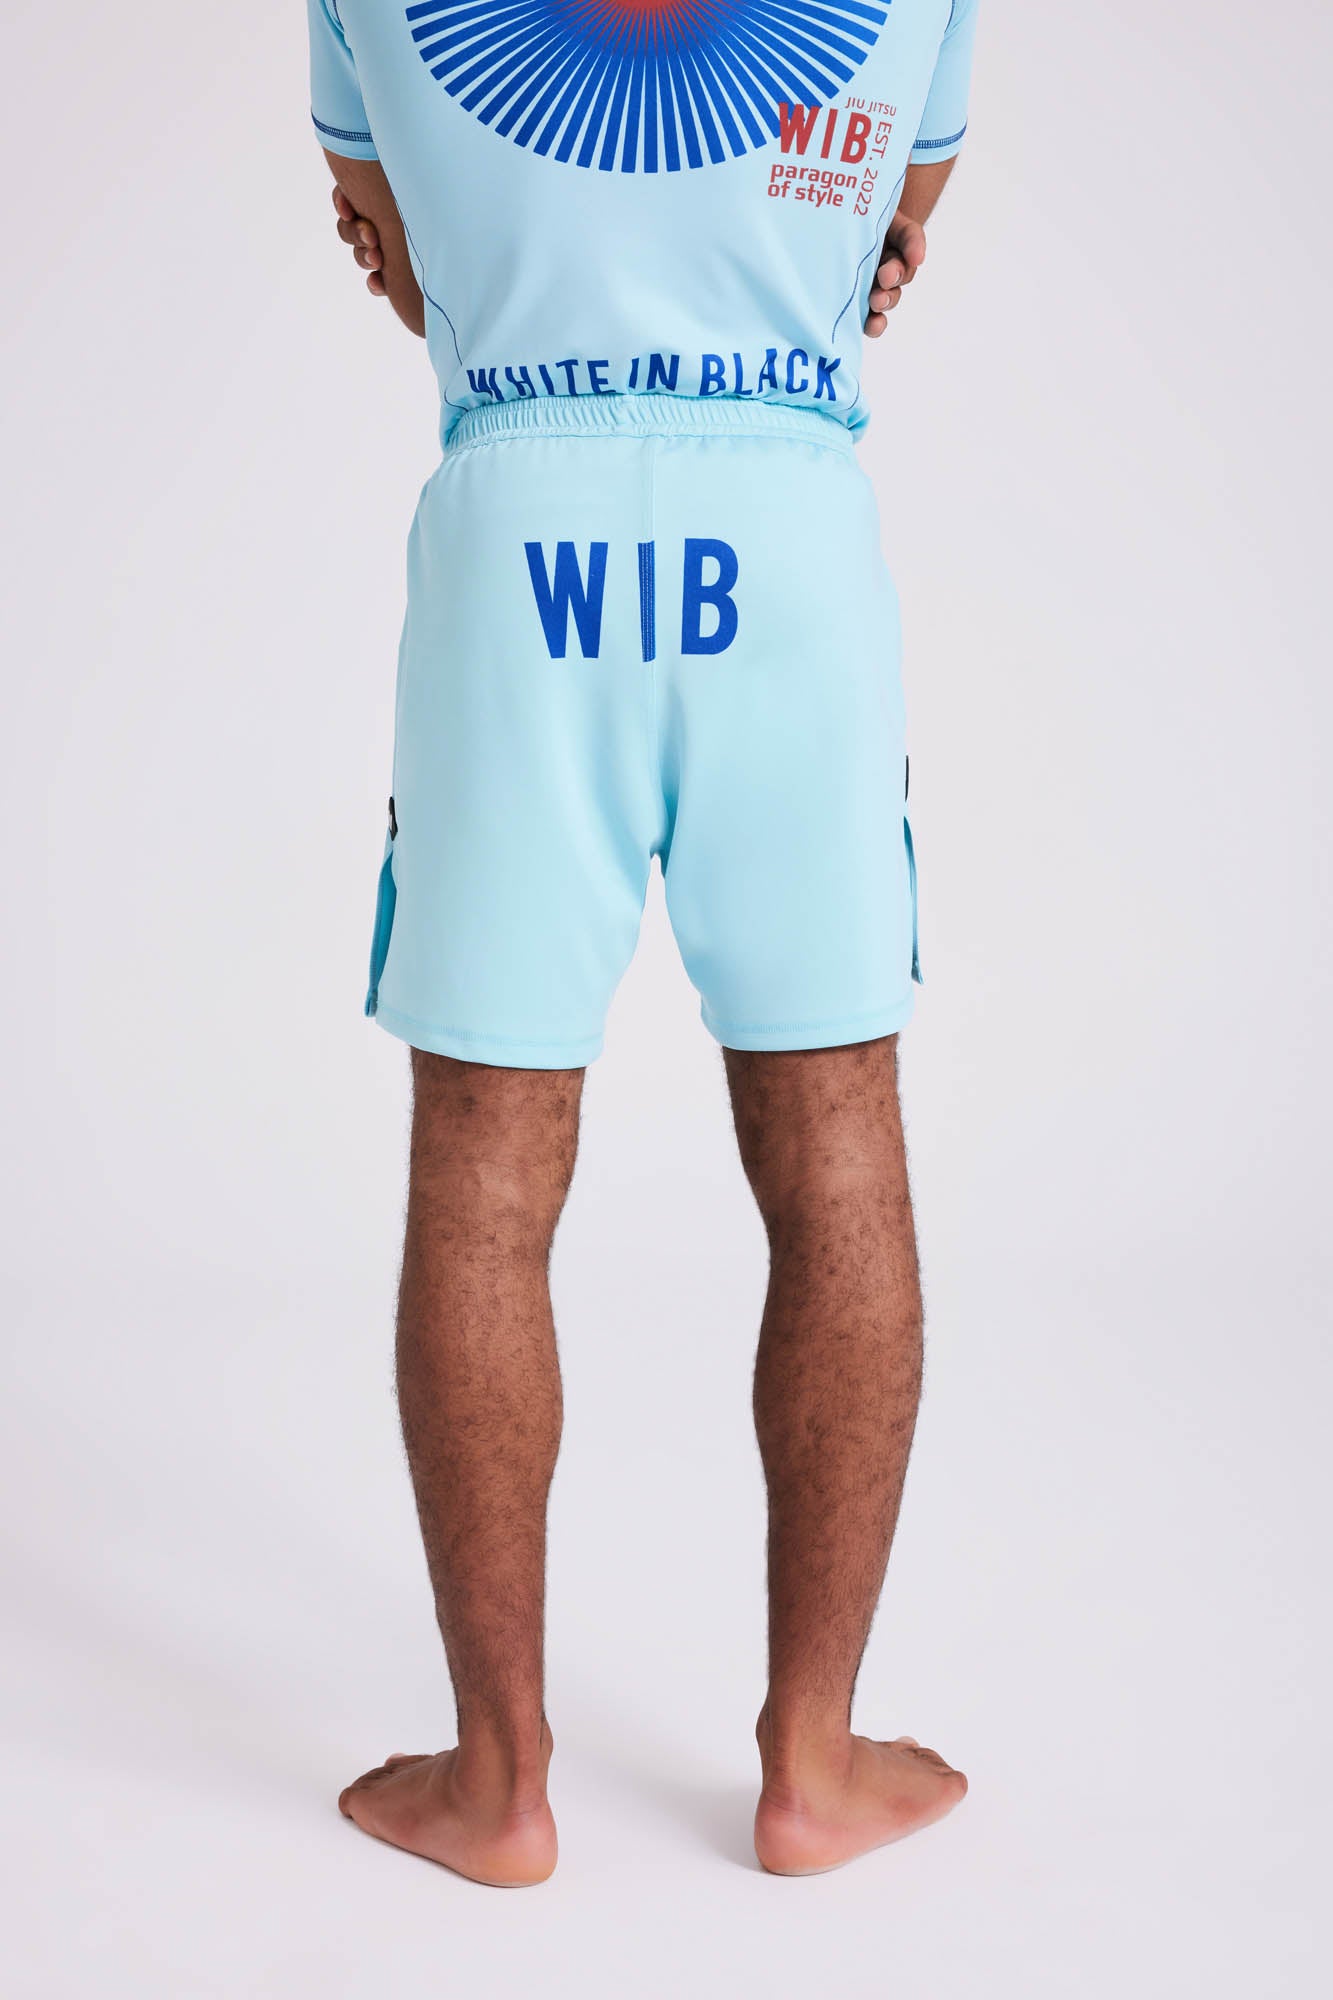 COLL1: Blue Shorts – White in Black